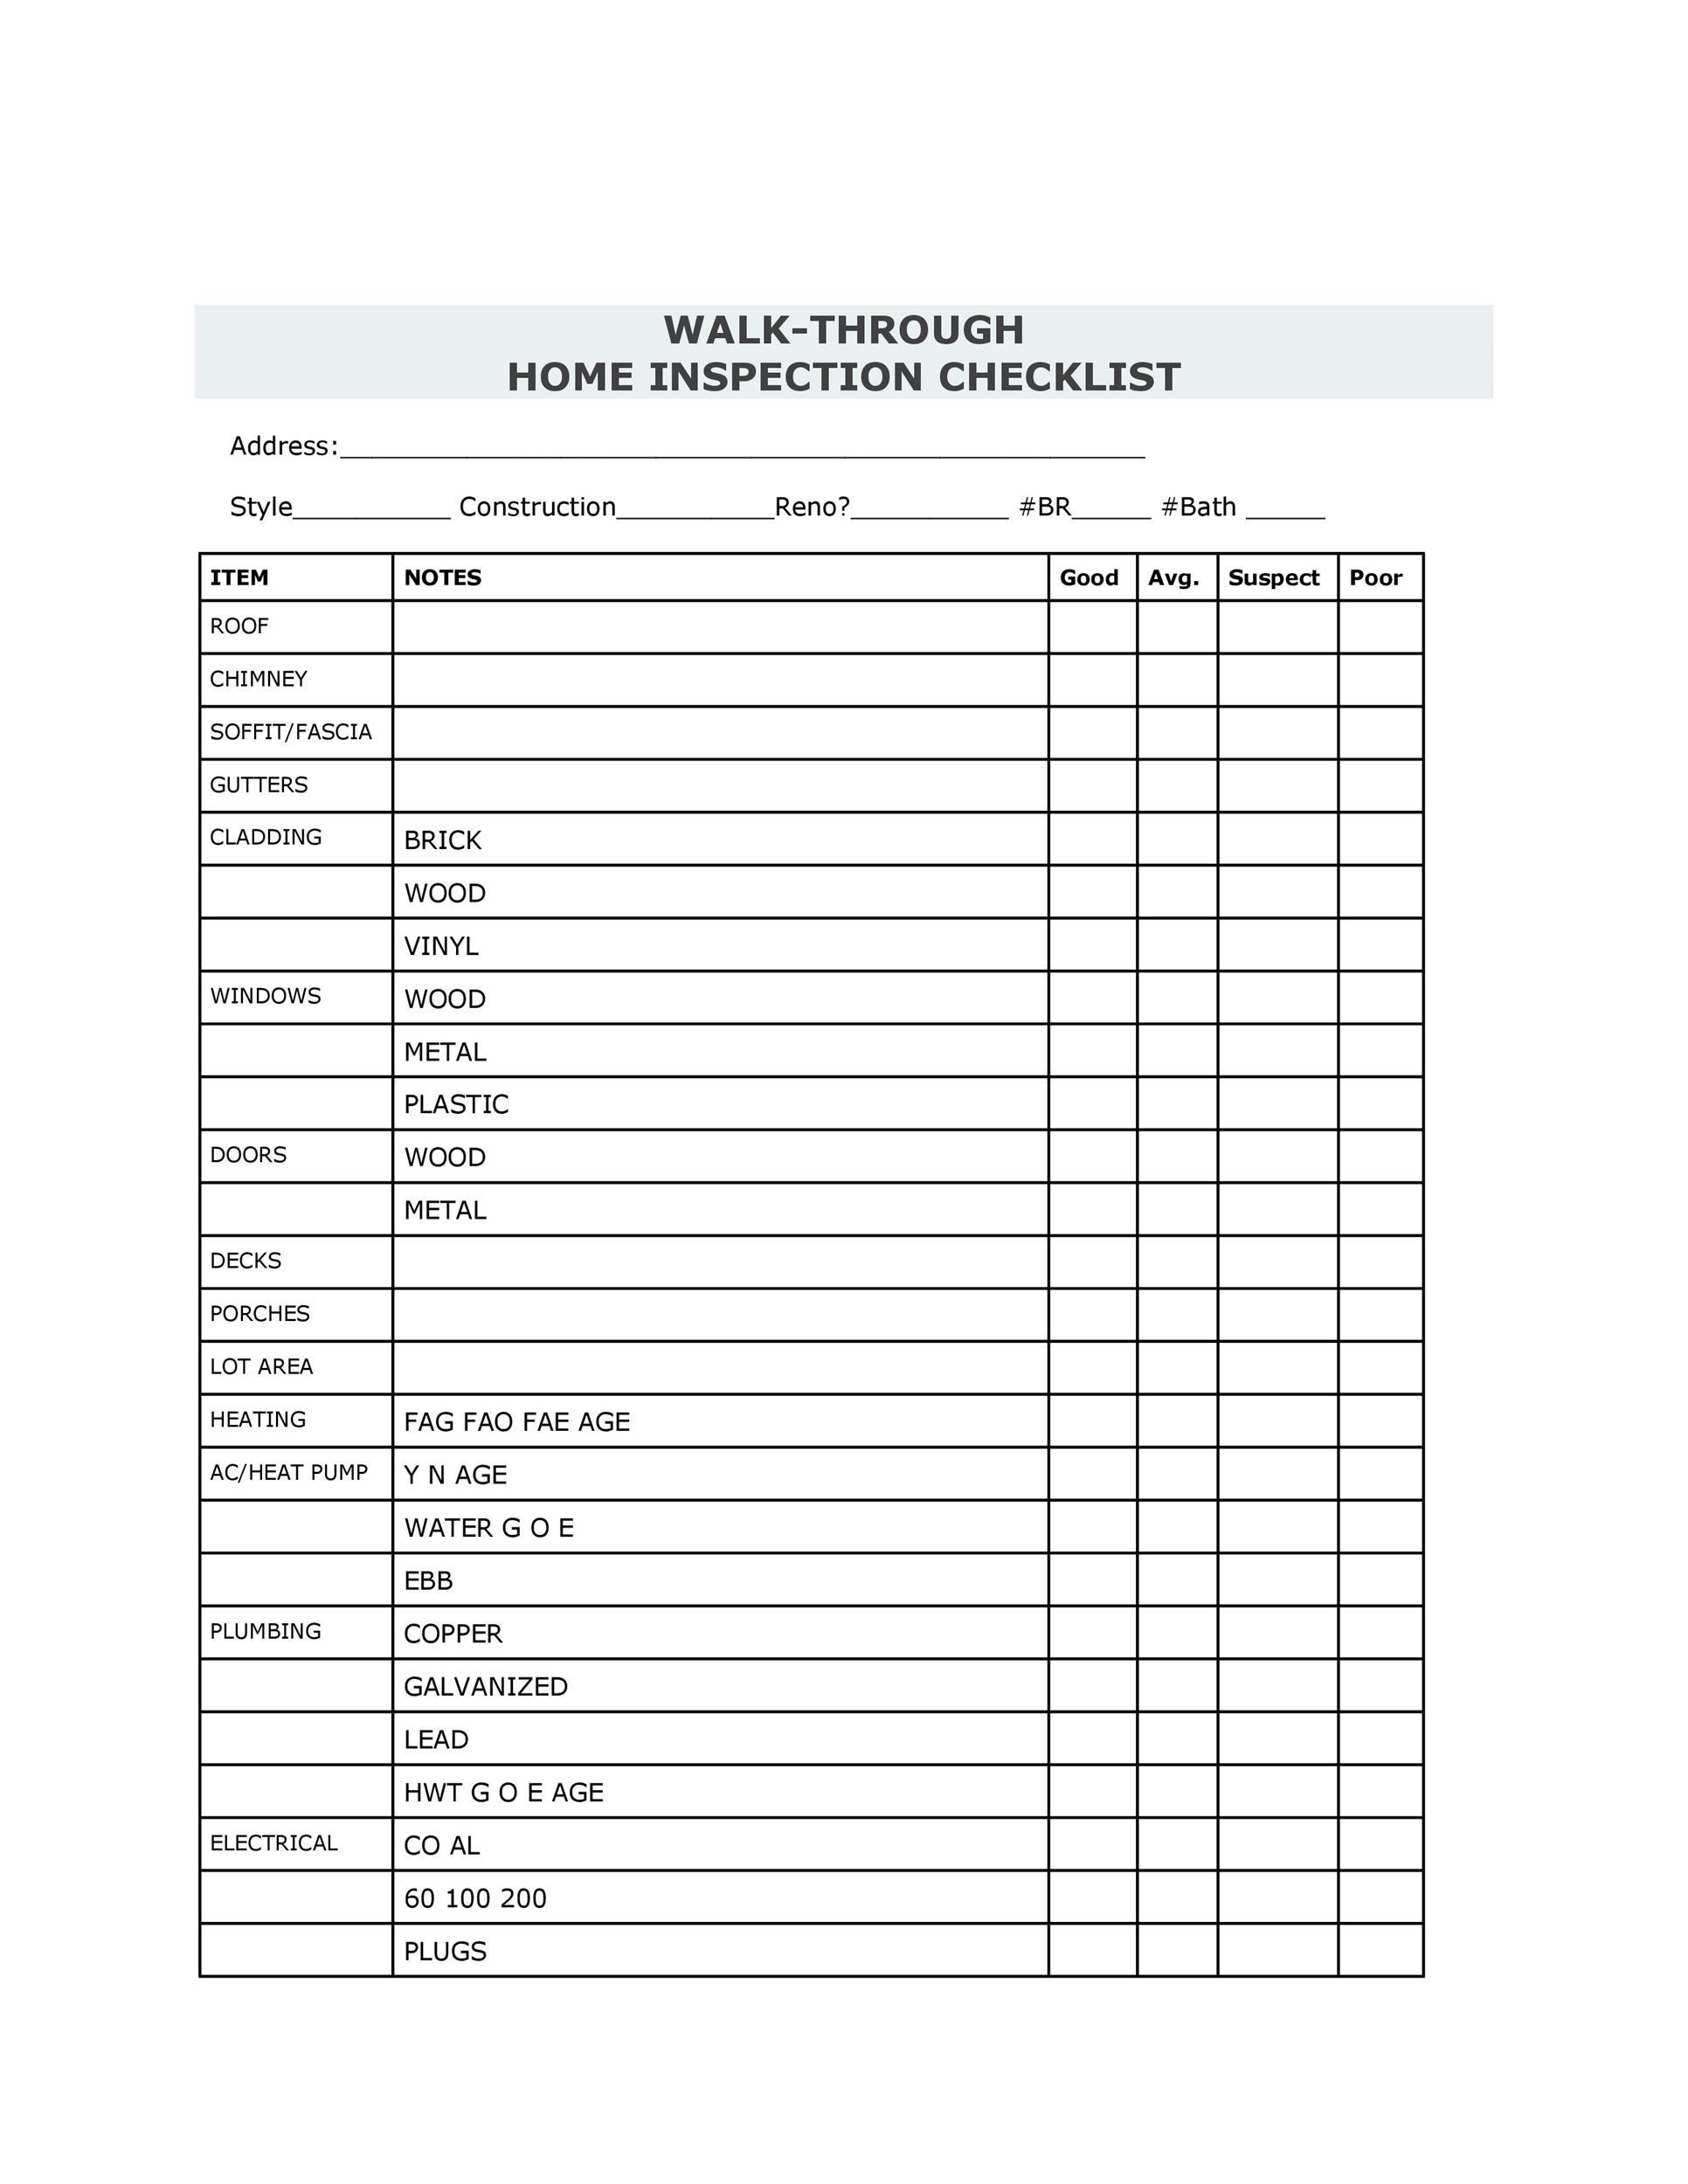 Safety Inspection Checklist Pdf - HSE Images & Videos Gallery Inside Home Inspection Report Template Pdf